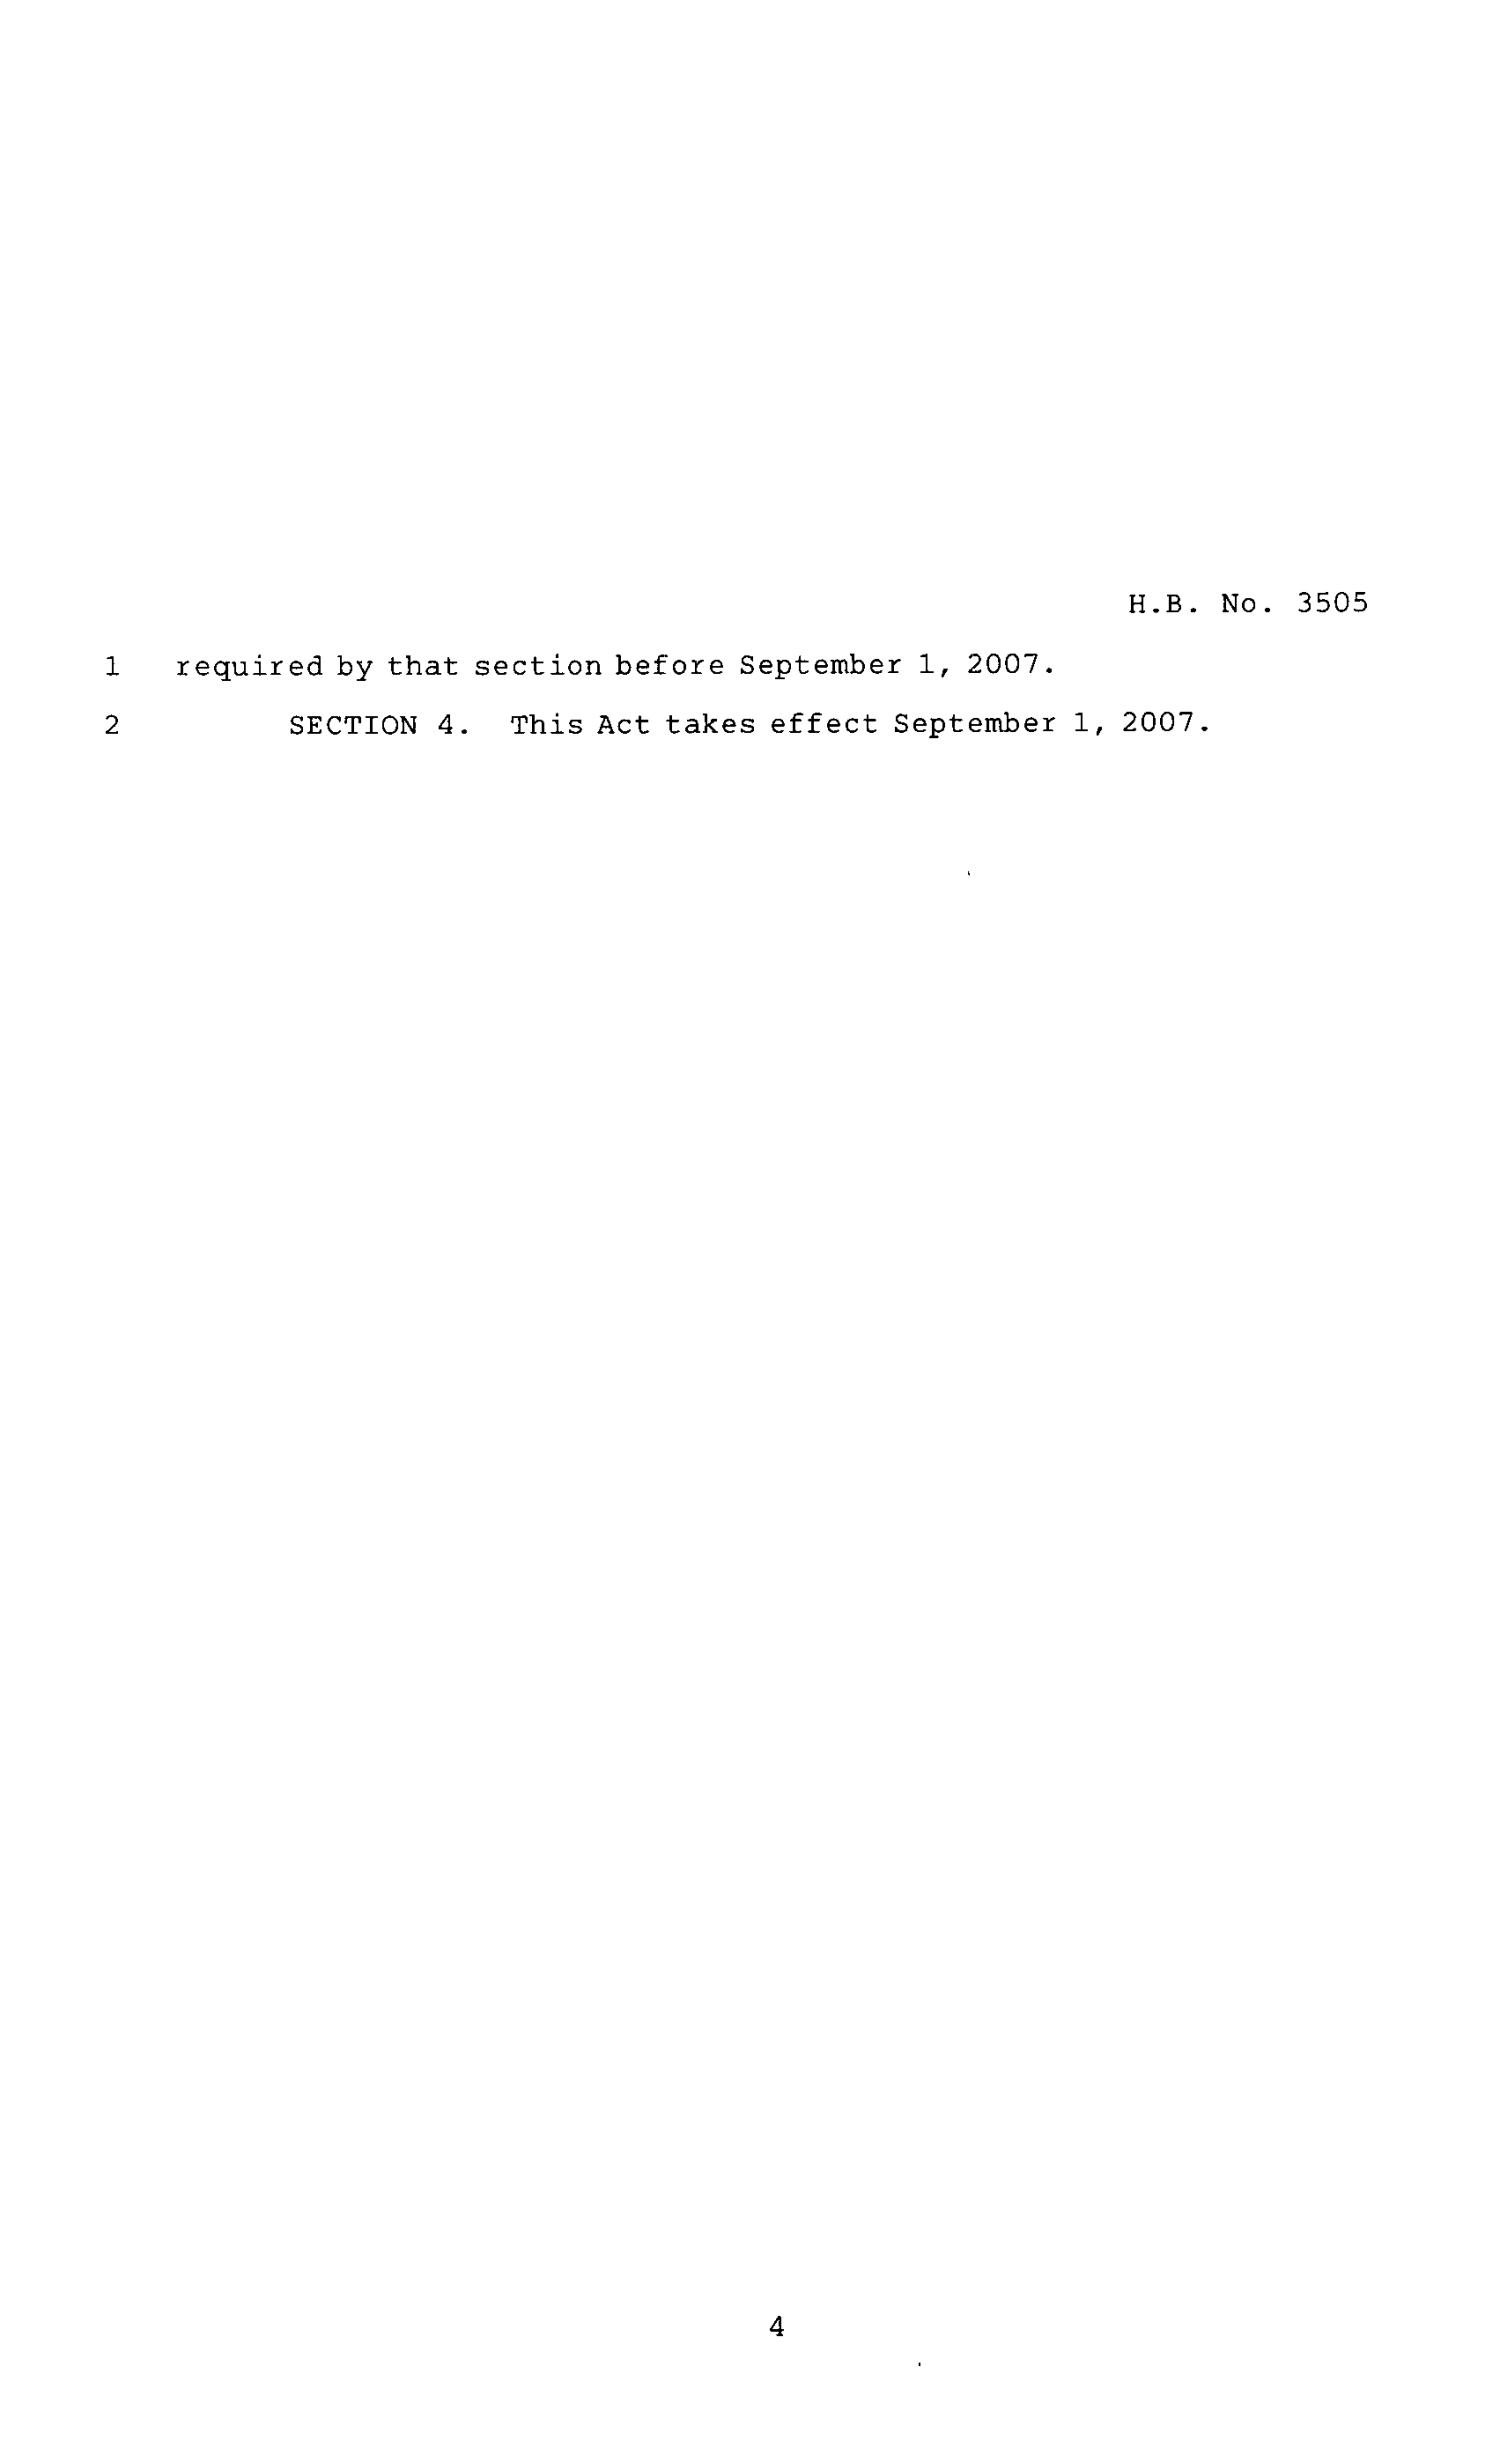 80th Texas Legislature, Regular Session, House Bill 3505, Chapter 765
                                                
                                                    [Sequence #]: 4 of 5
                                                